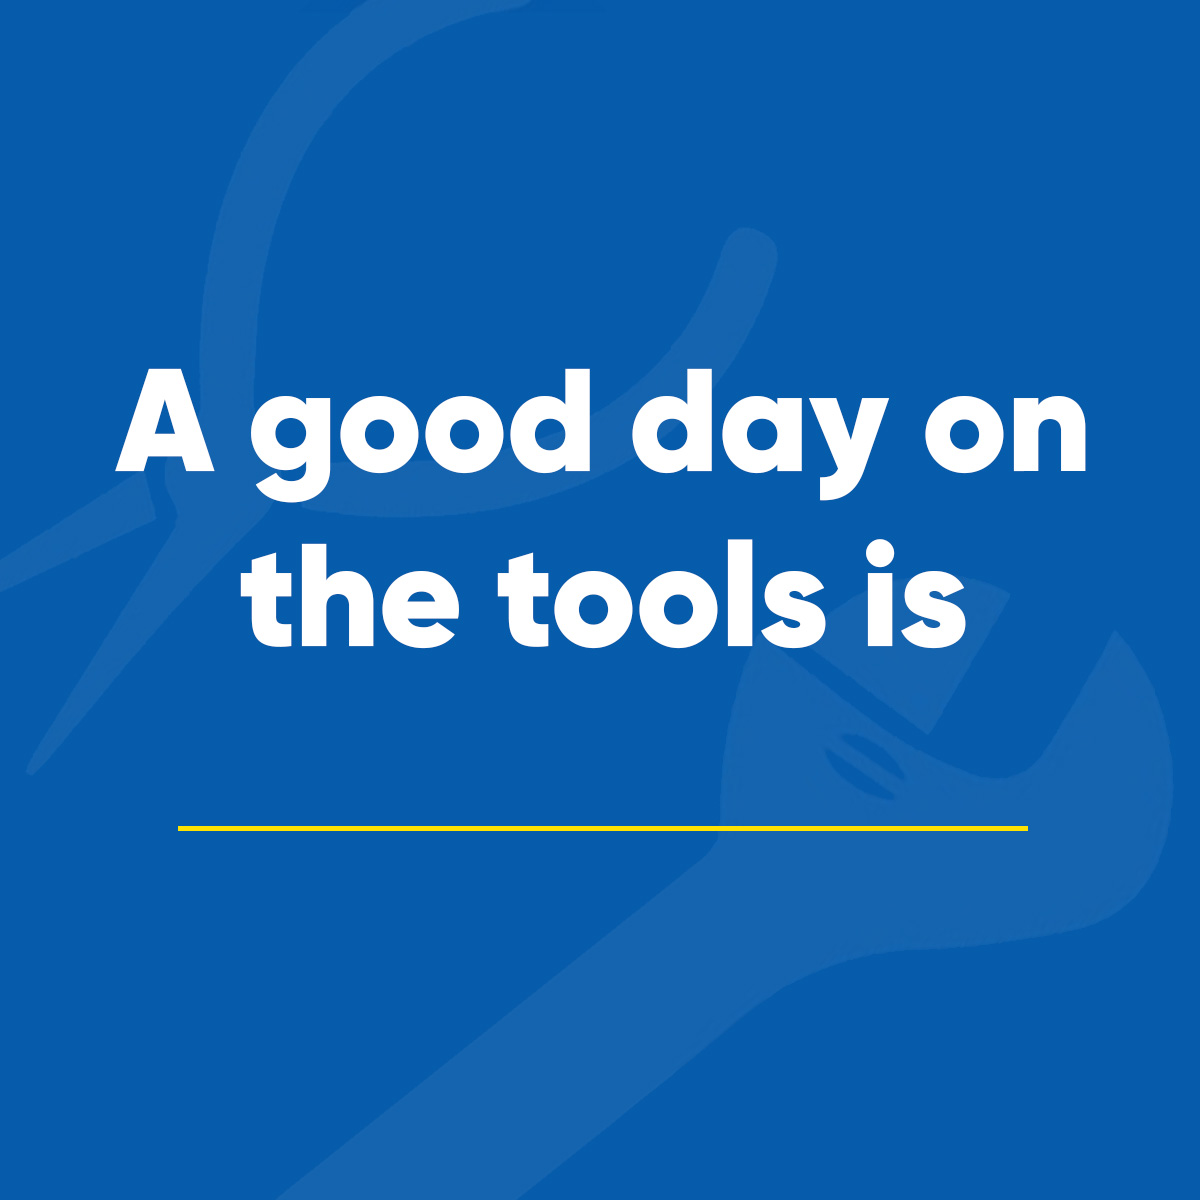 What's been your best day on the tools? 🤩 #internationalhappinessday